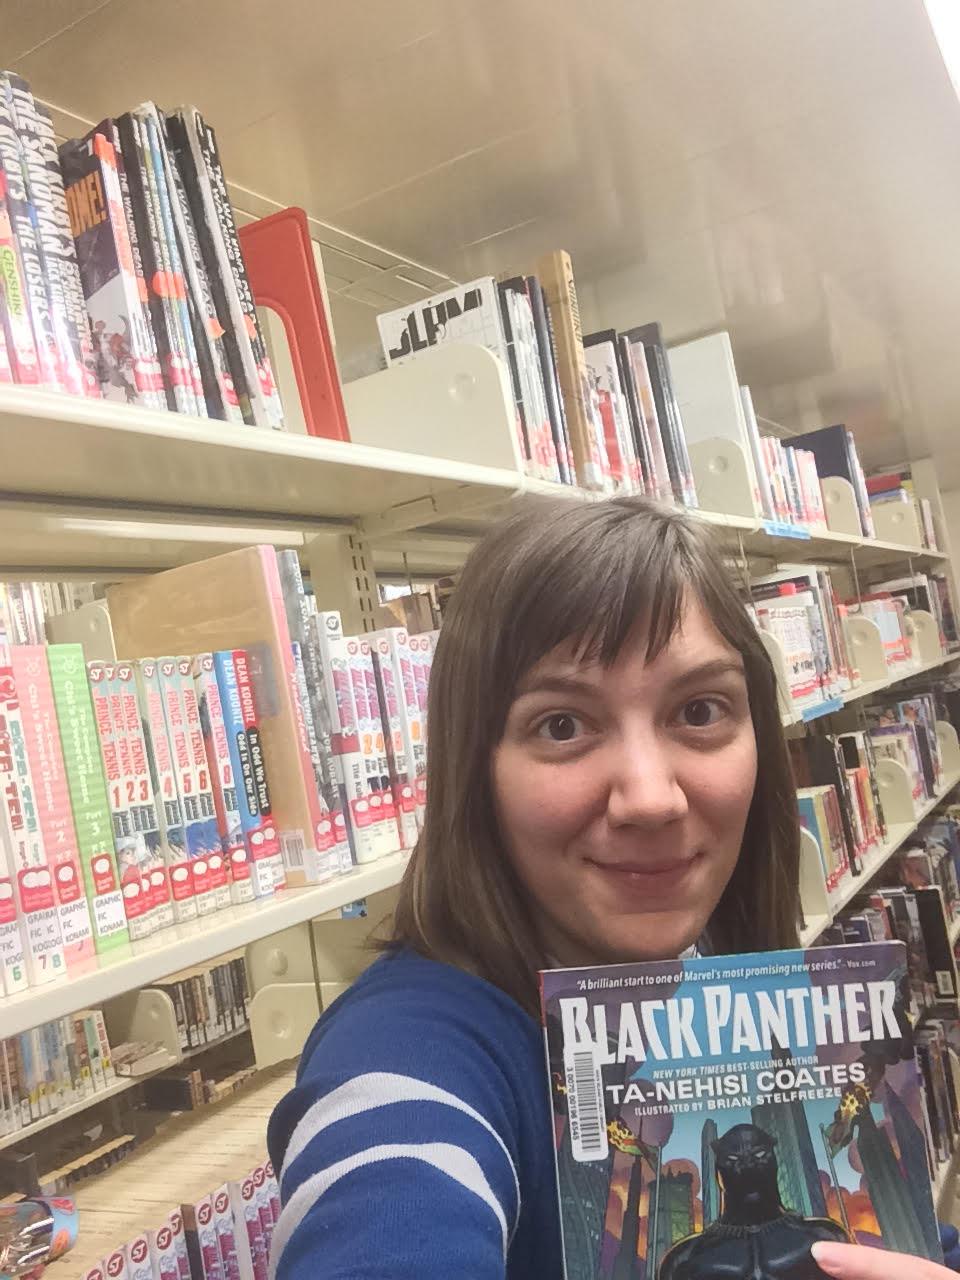 Emily the Young Adult Librarian holding a graphic novel